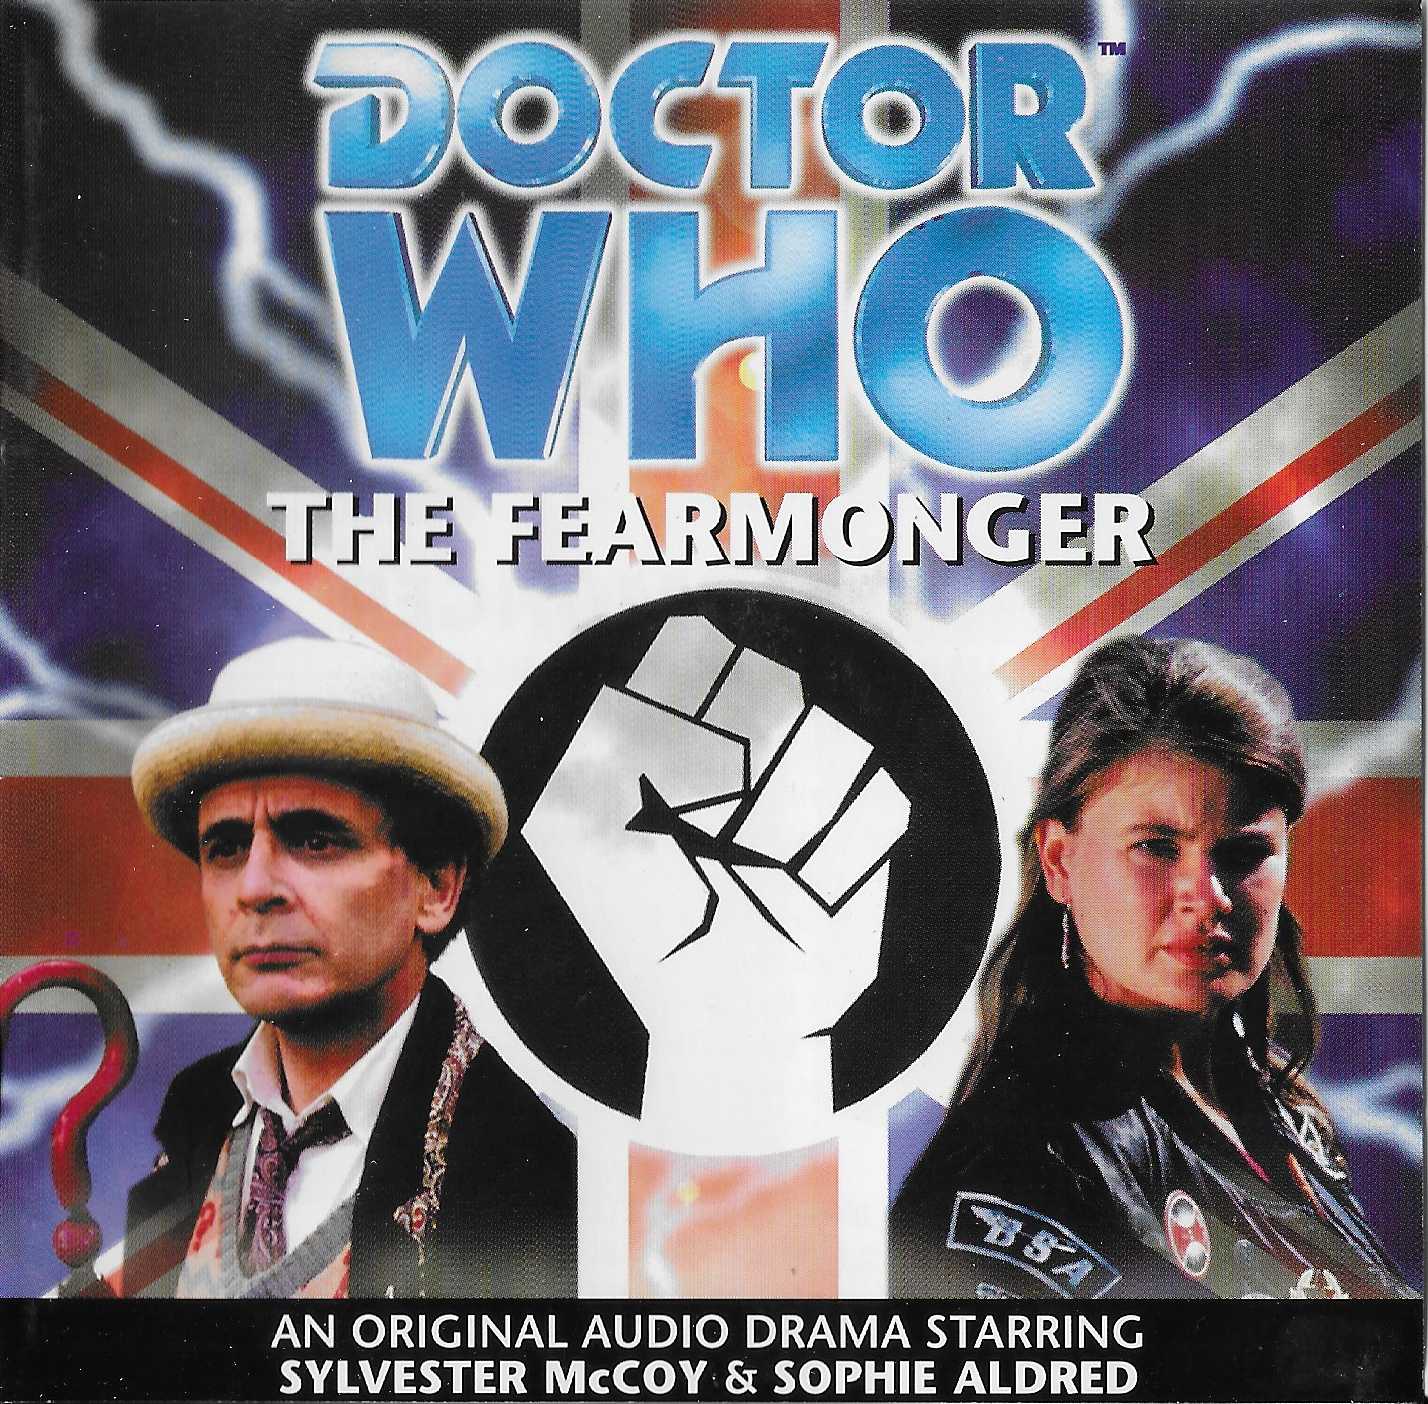 Picture of BFPDWCD 7R Doctor Who - The fearmonger by artist Jonathan Blum from the BBC records and Tapes library